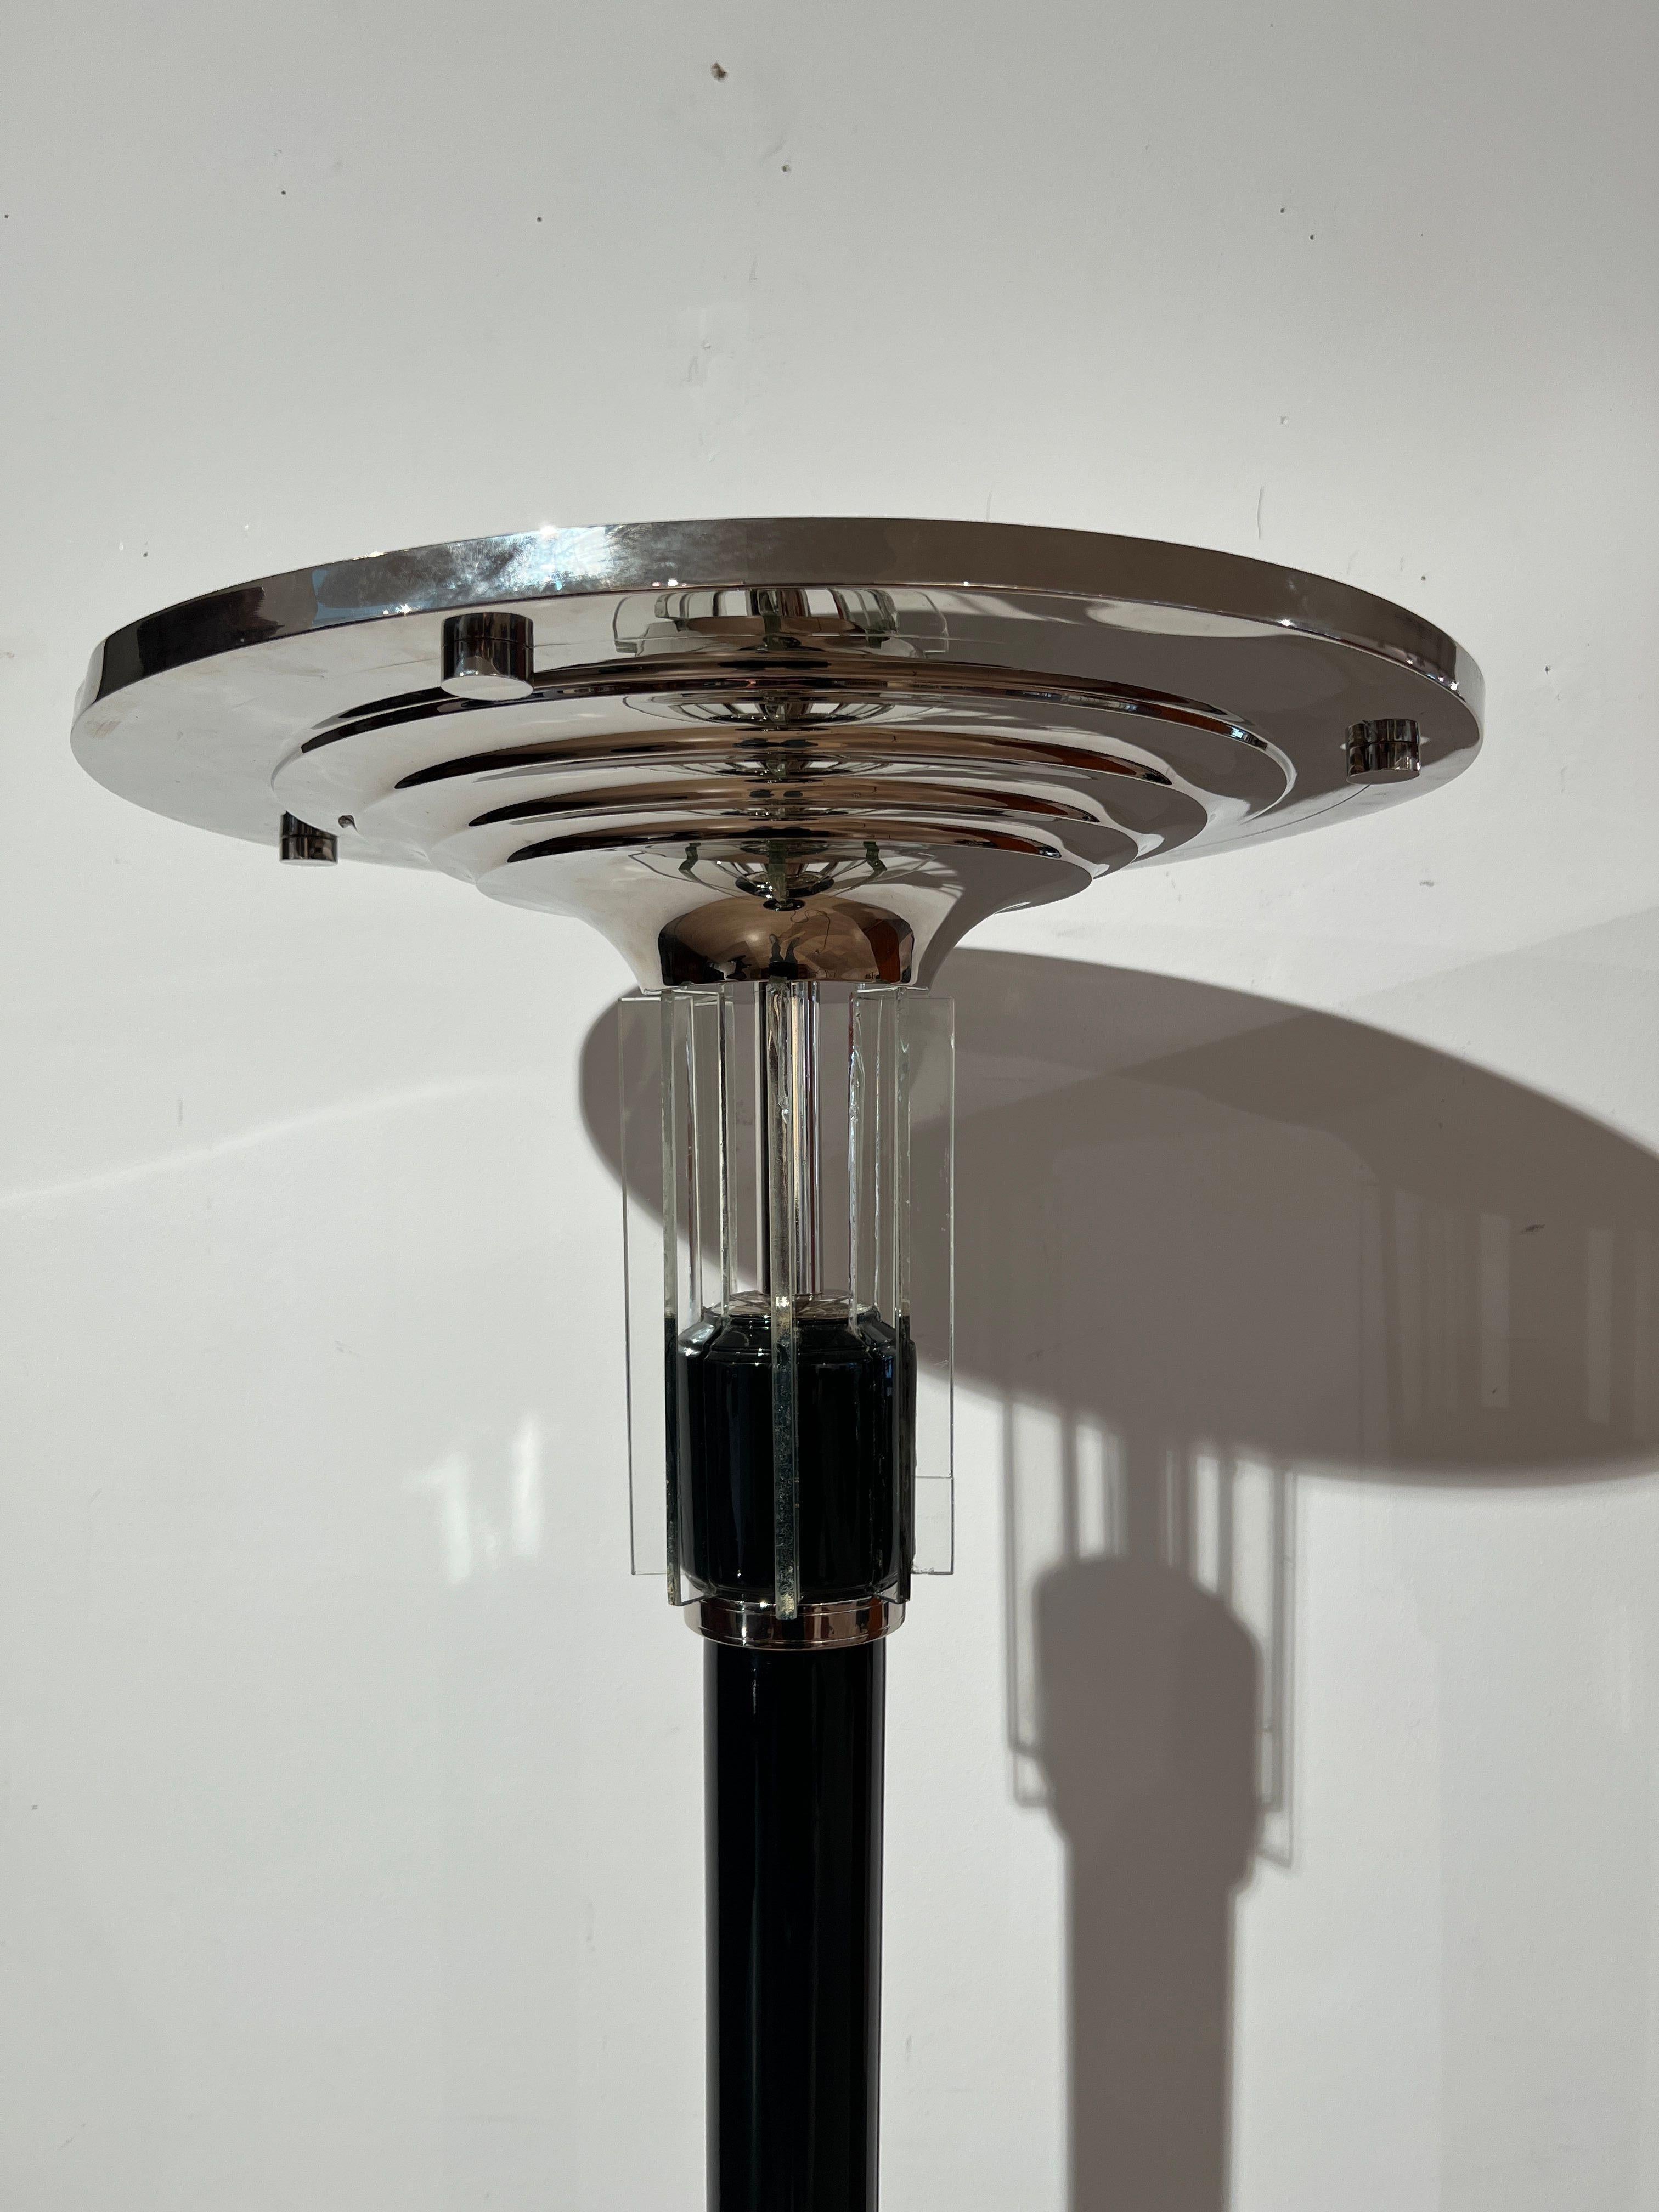 Mid-20th Century Art Deco Floor Lamp, Black Lacquer, Nickel and Glass, France circa 1930